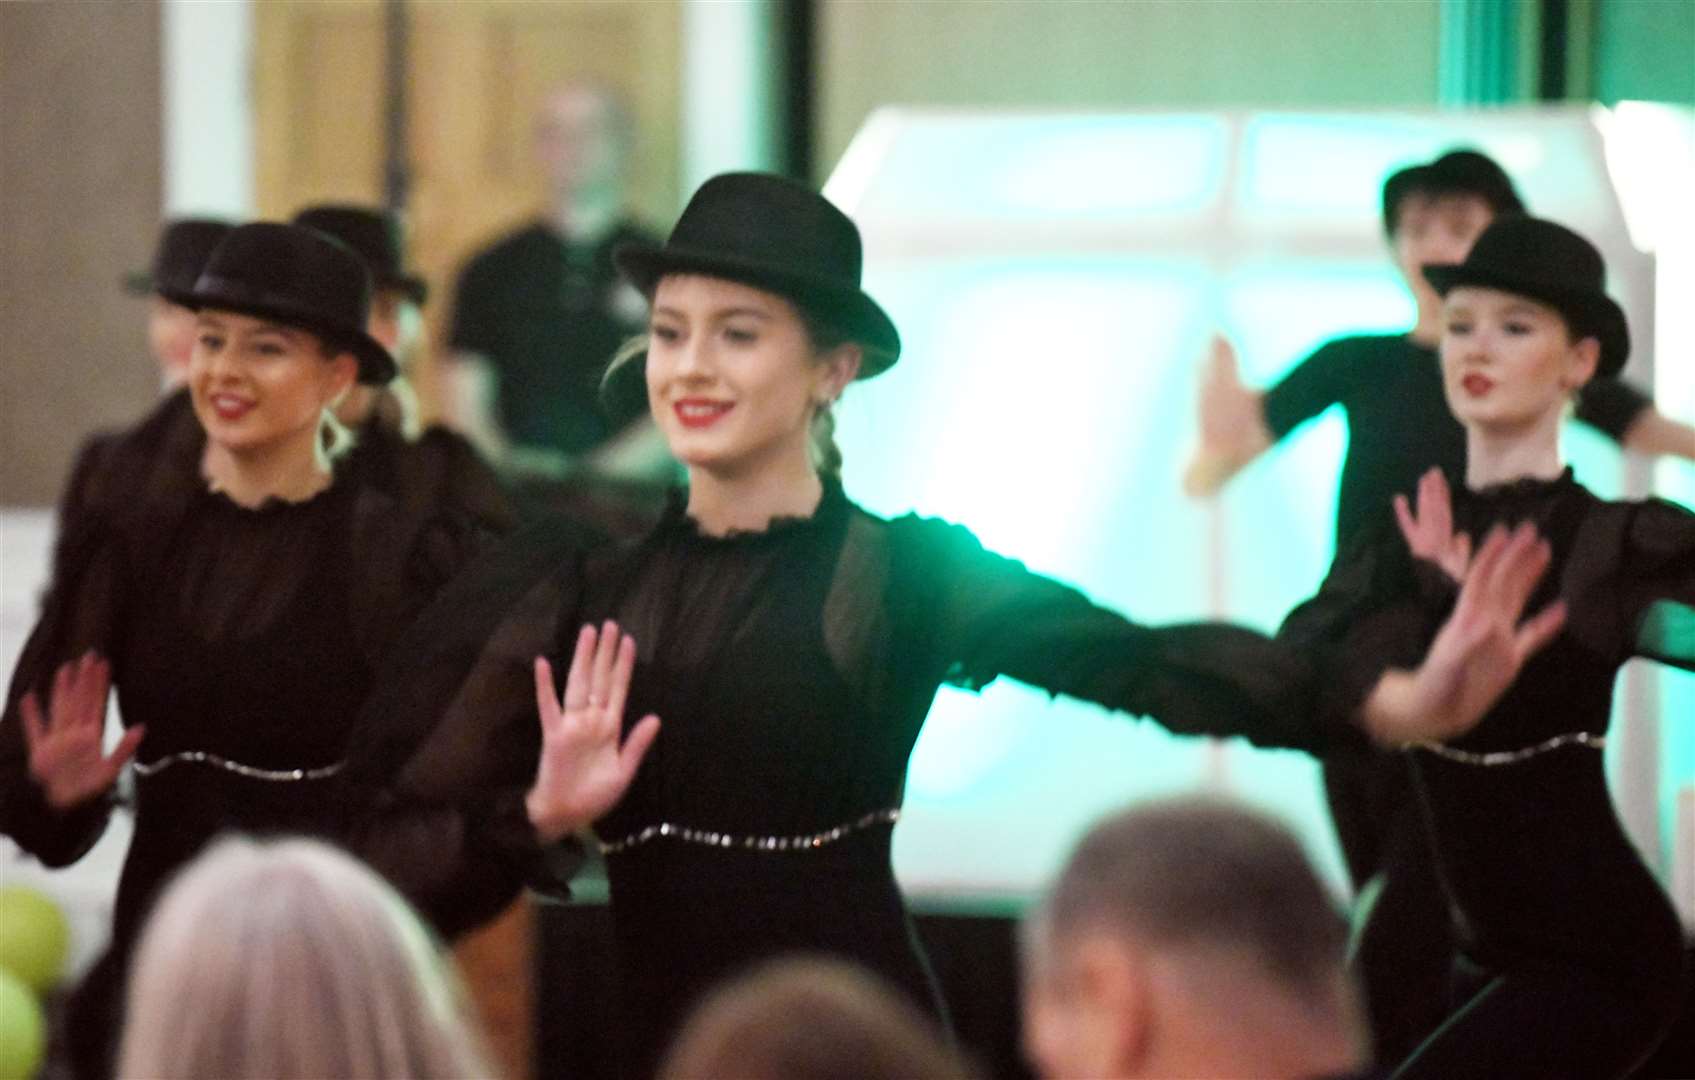 TFX performers put on a Fosse jazz dance performance.